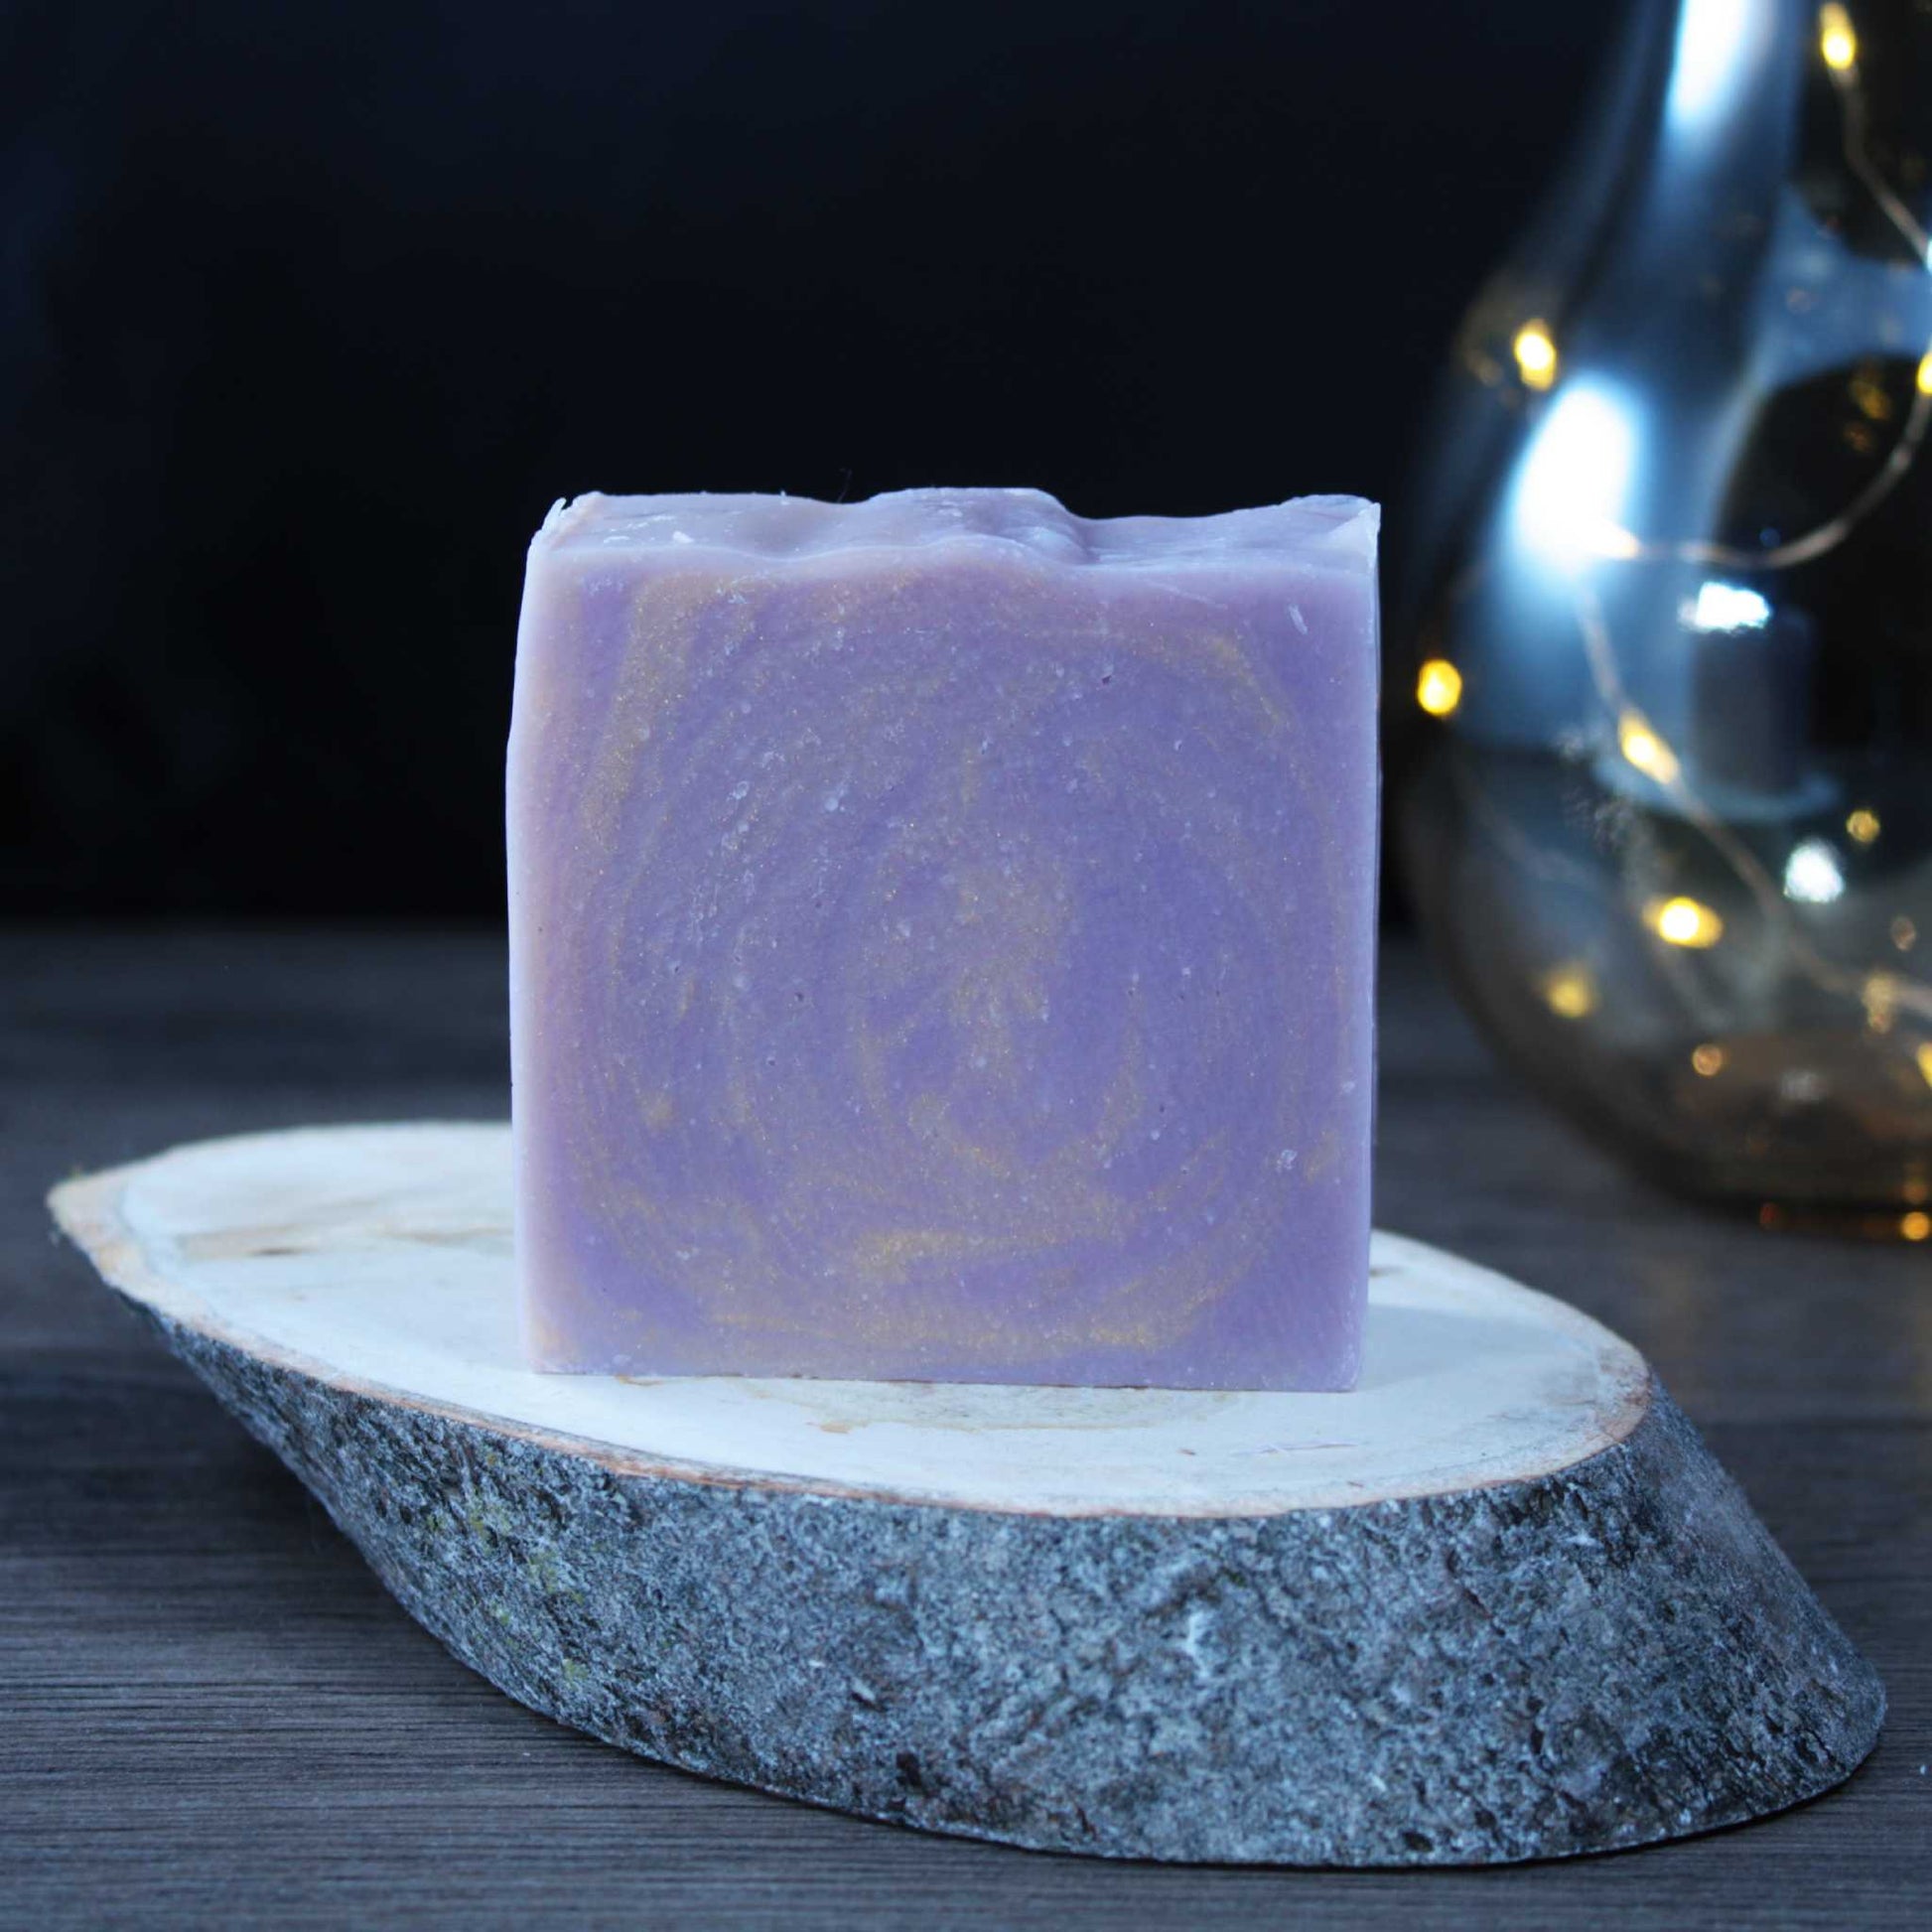 Violet soap Soaps by Abi homemade in almonte ontario